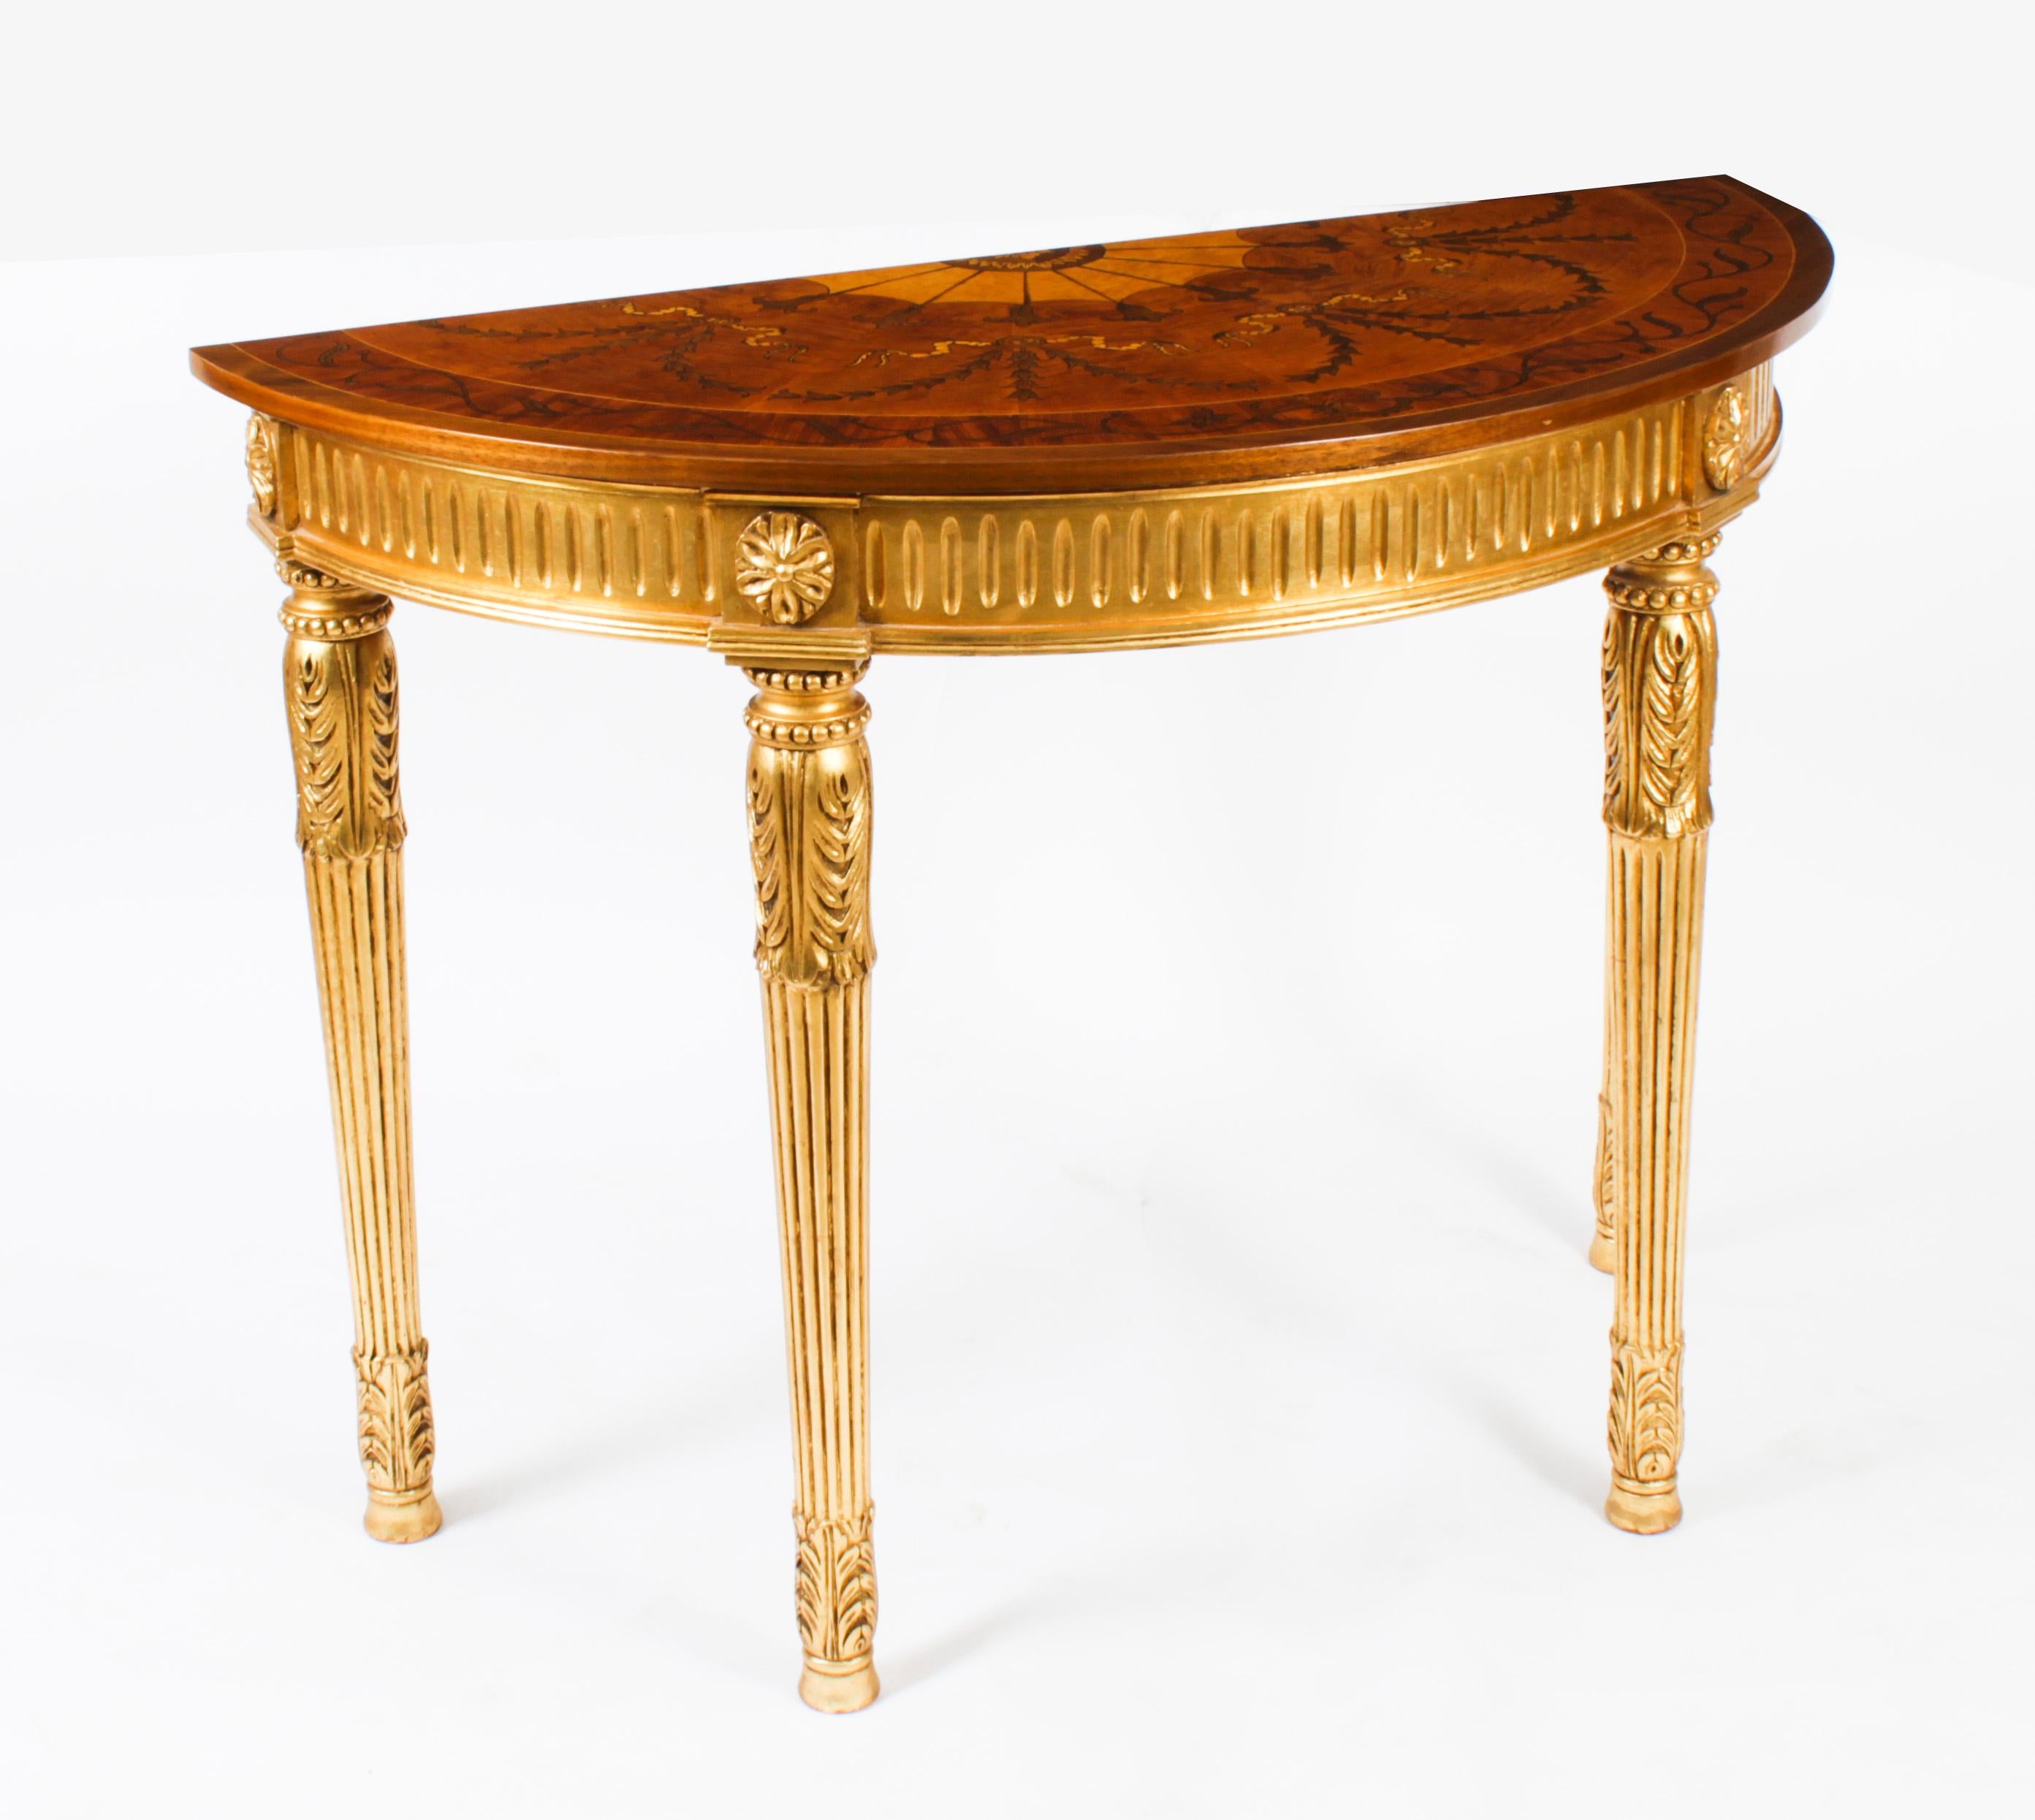 This is an exquisite pair of Sheraton Revival giltwood half moon console tables with elaborate marquetry inlaid decoration dating from the late 20th Century.
 
Sheraton is a style of English furniture that originated around 1800. This style is